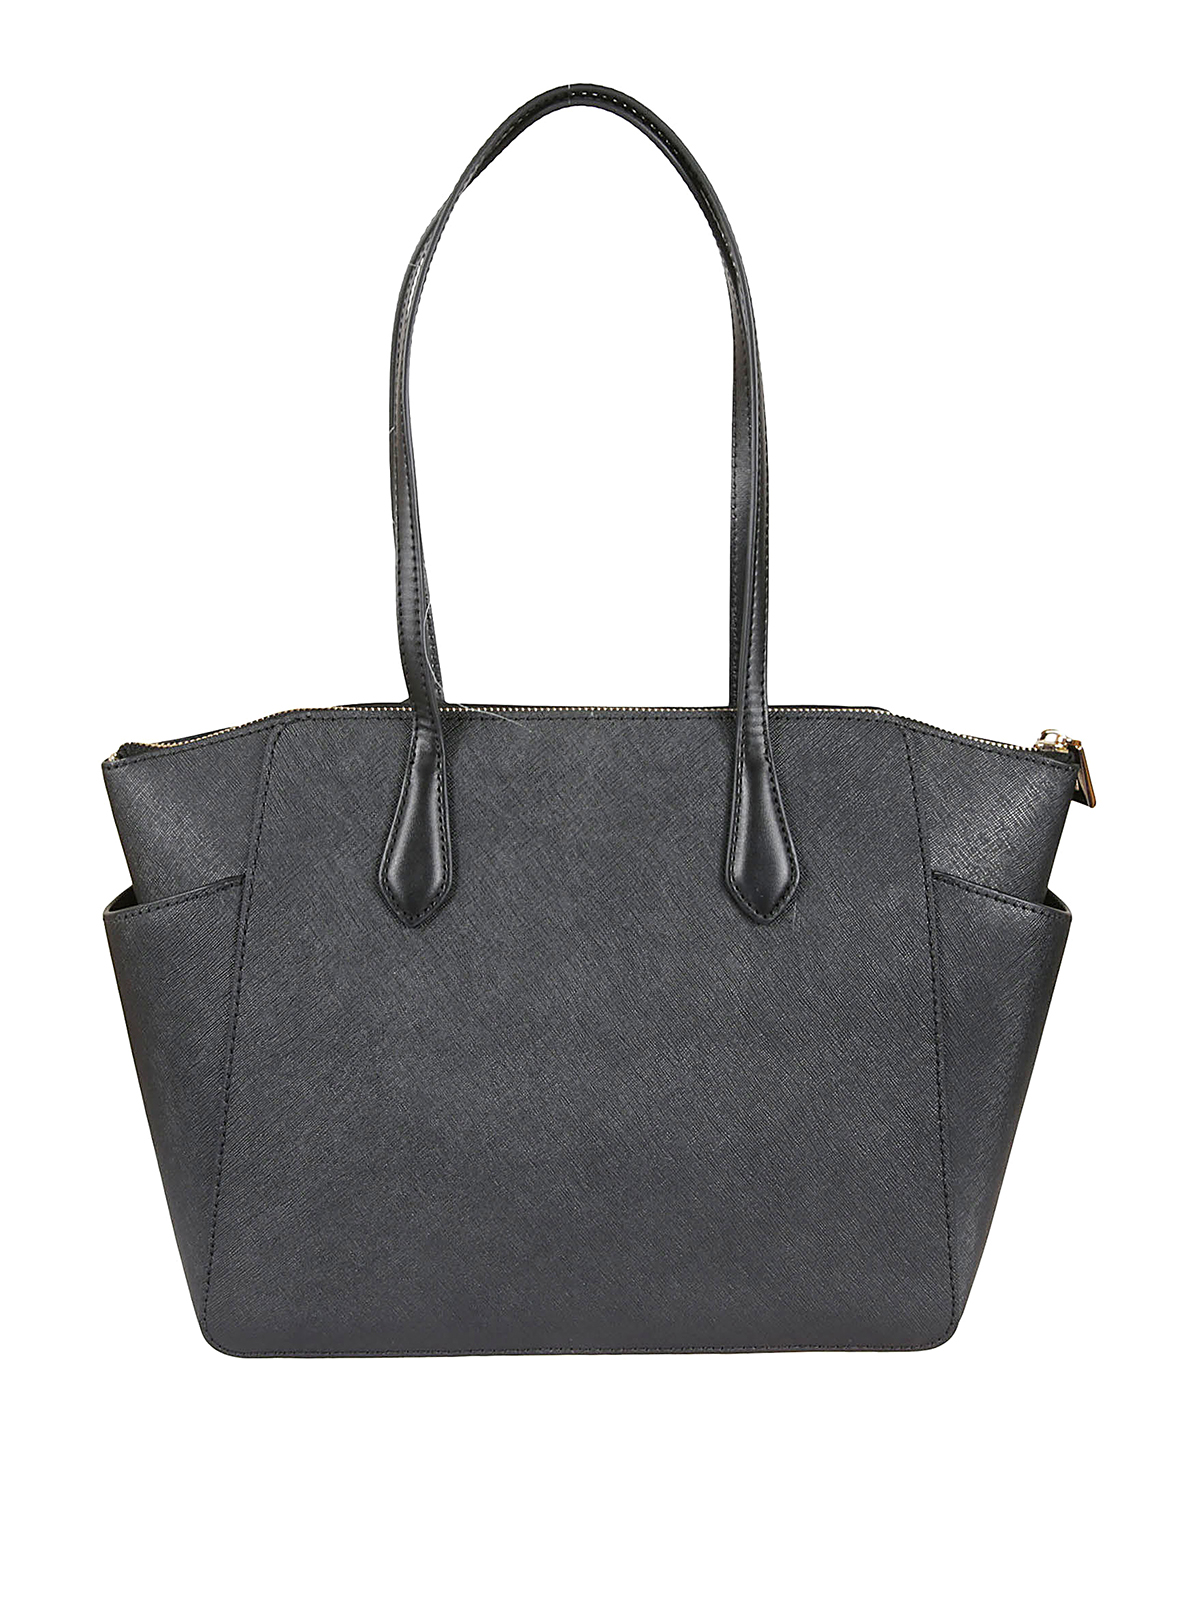 Shop Michael Kors Marilyn Saffiano Leather Tote Bag In Negro